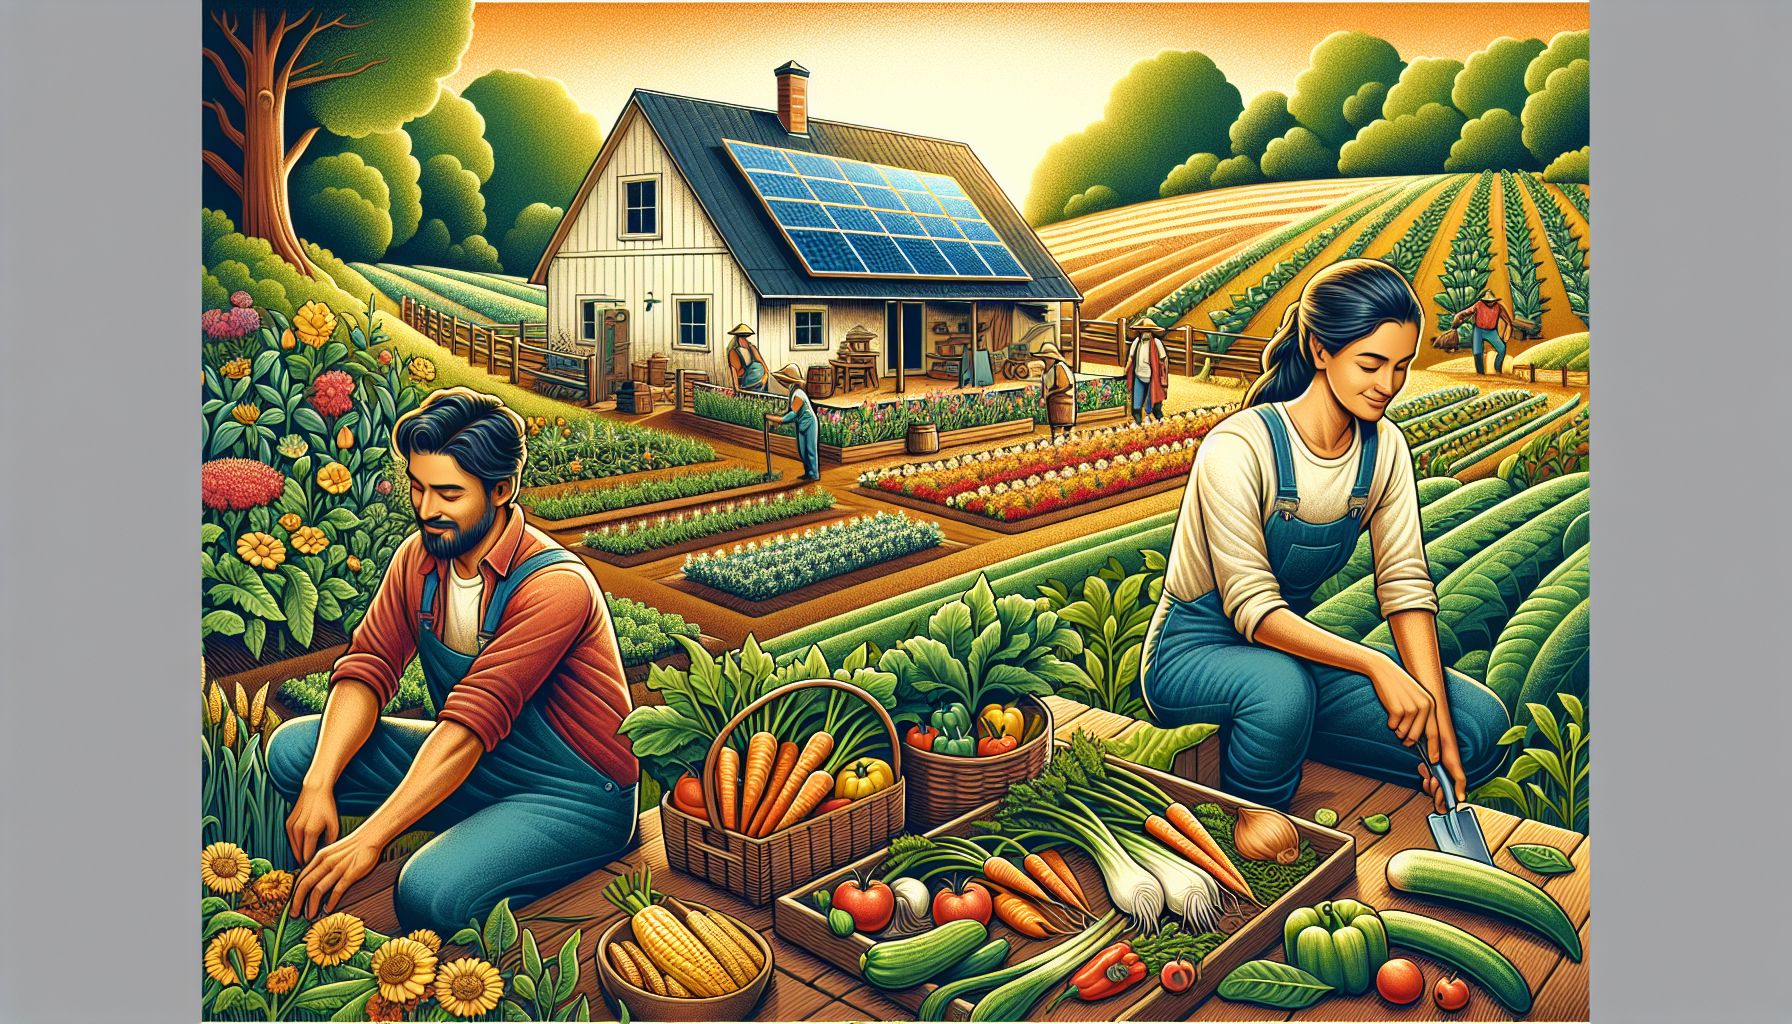 Farming: The Root of Delicious Recipes and Sustainable Living